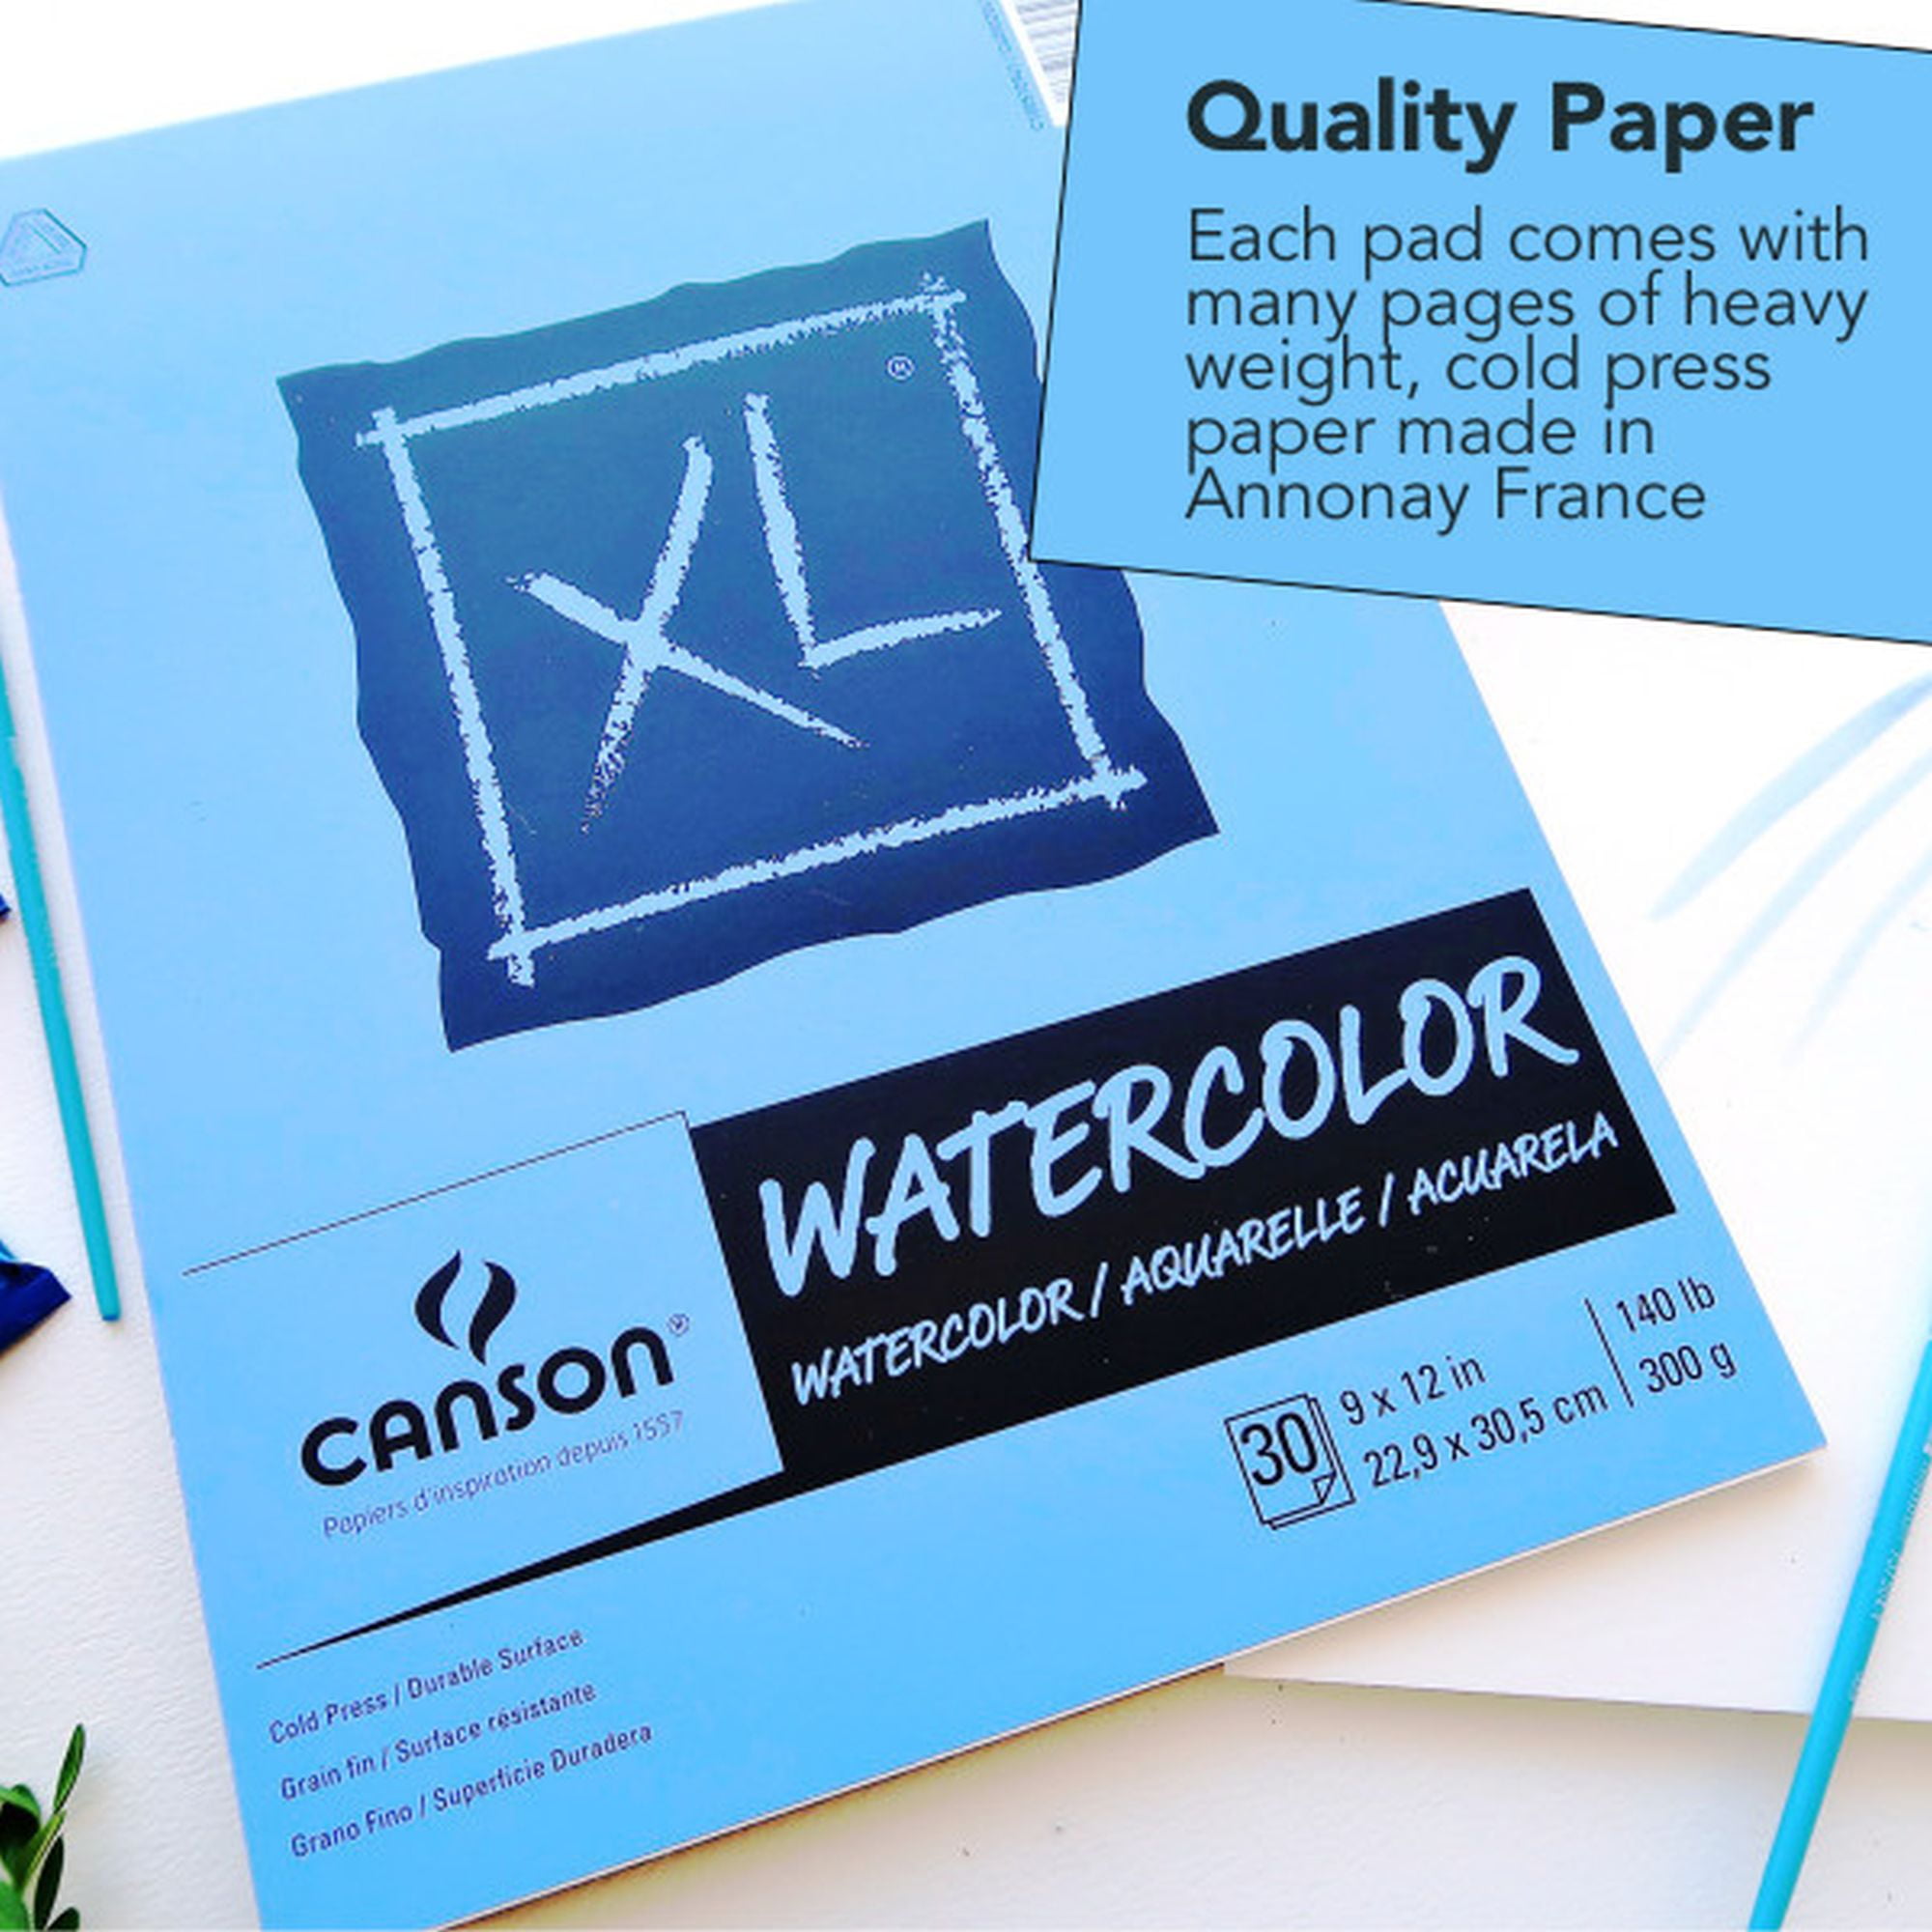 Canson Montval Watercolour Paper 300 GSM A4 (5+1),( 10+4) – TheKalamStore